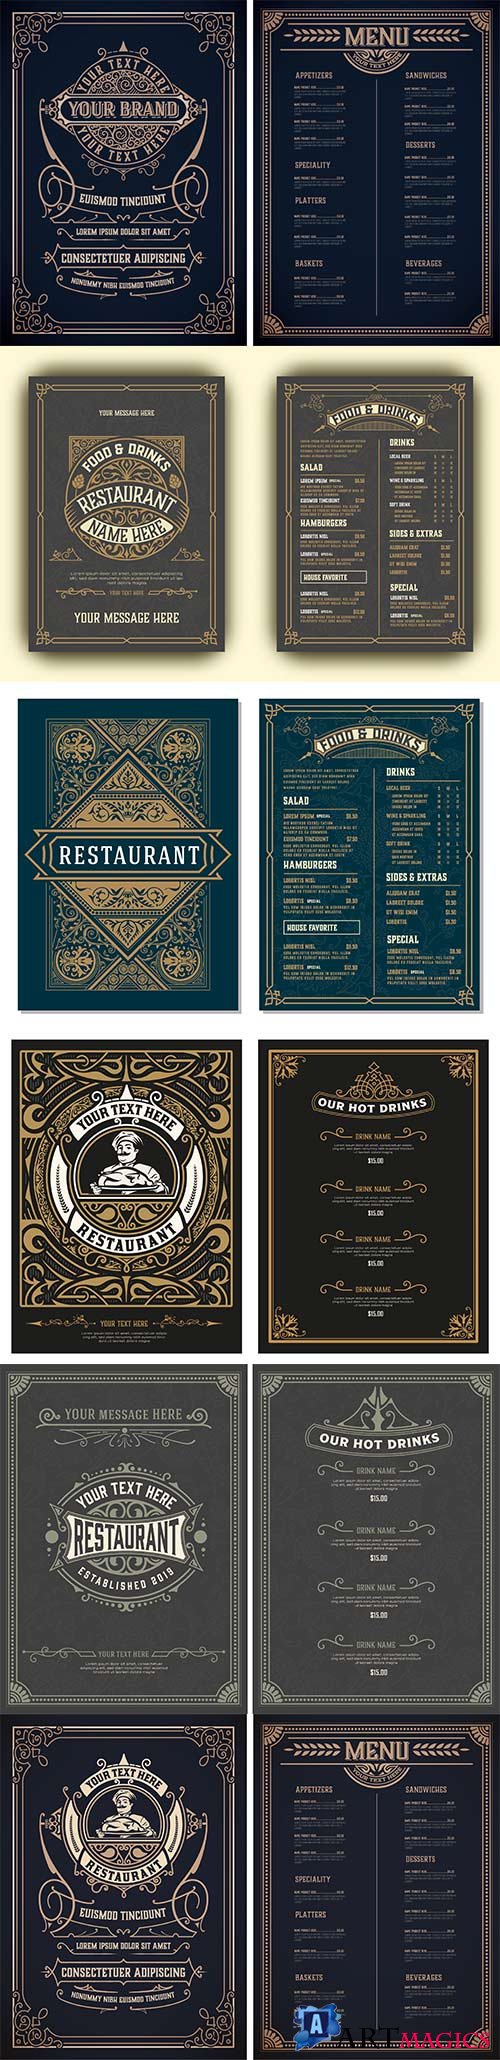 Vintage template for restaurant menu design with Chef 